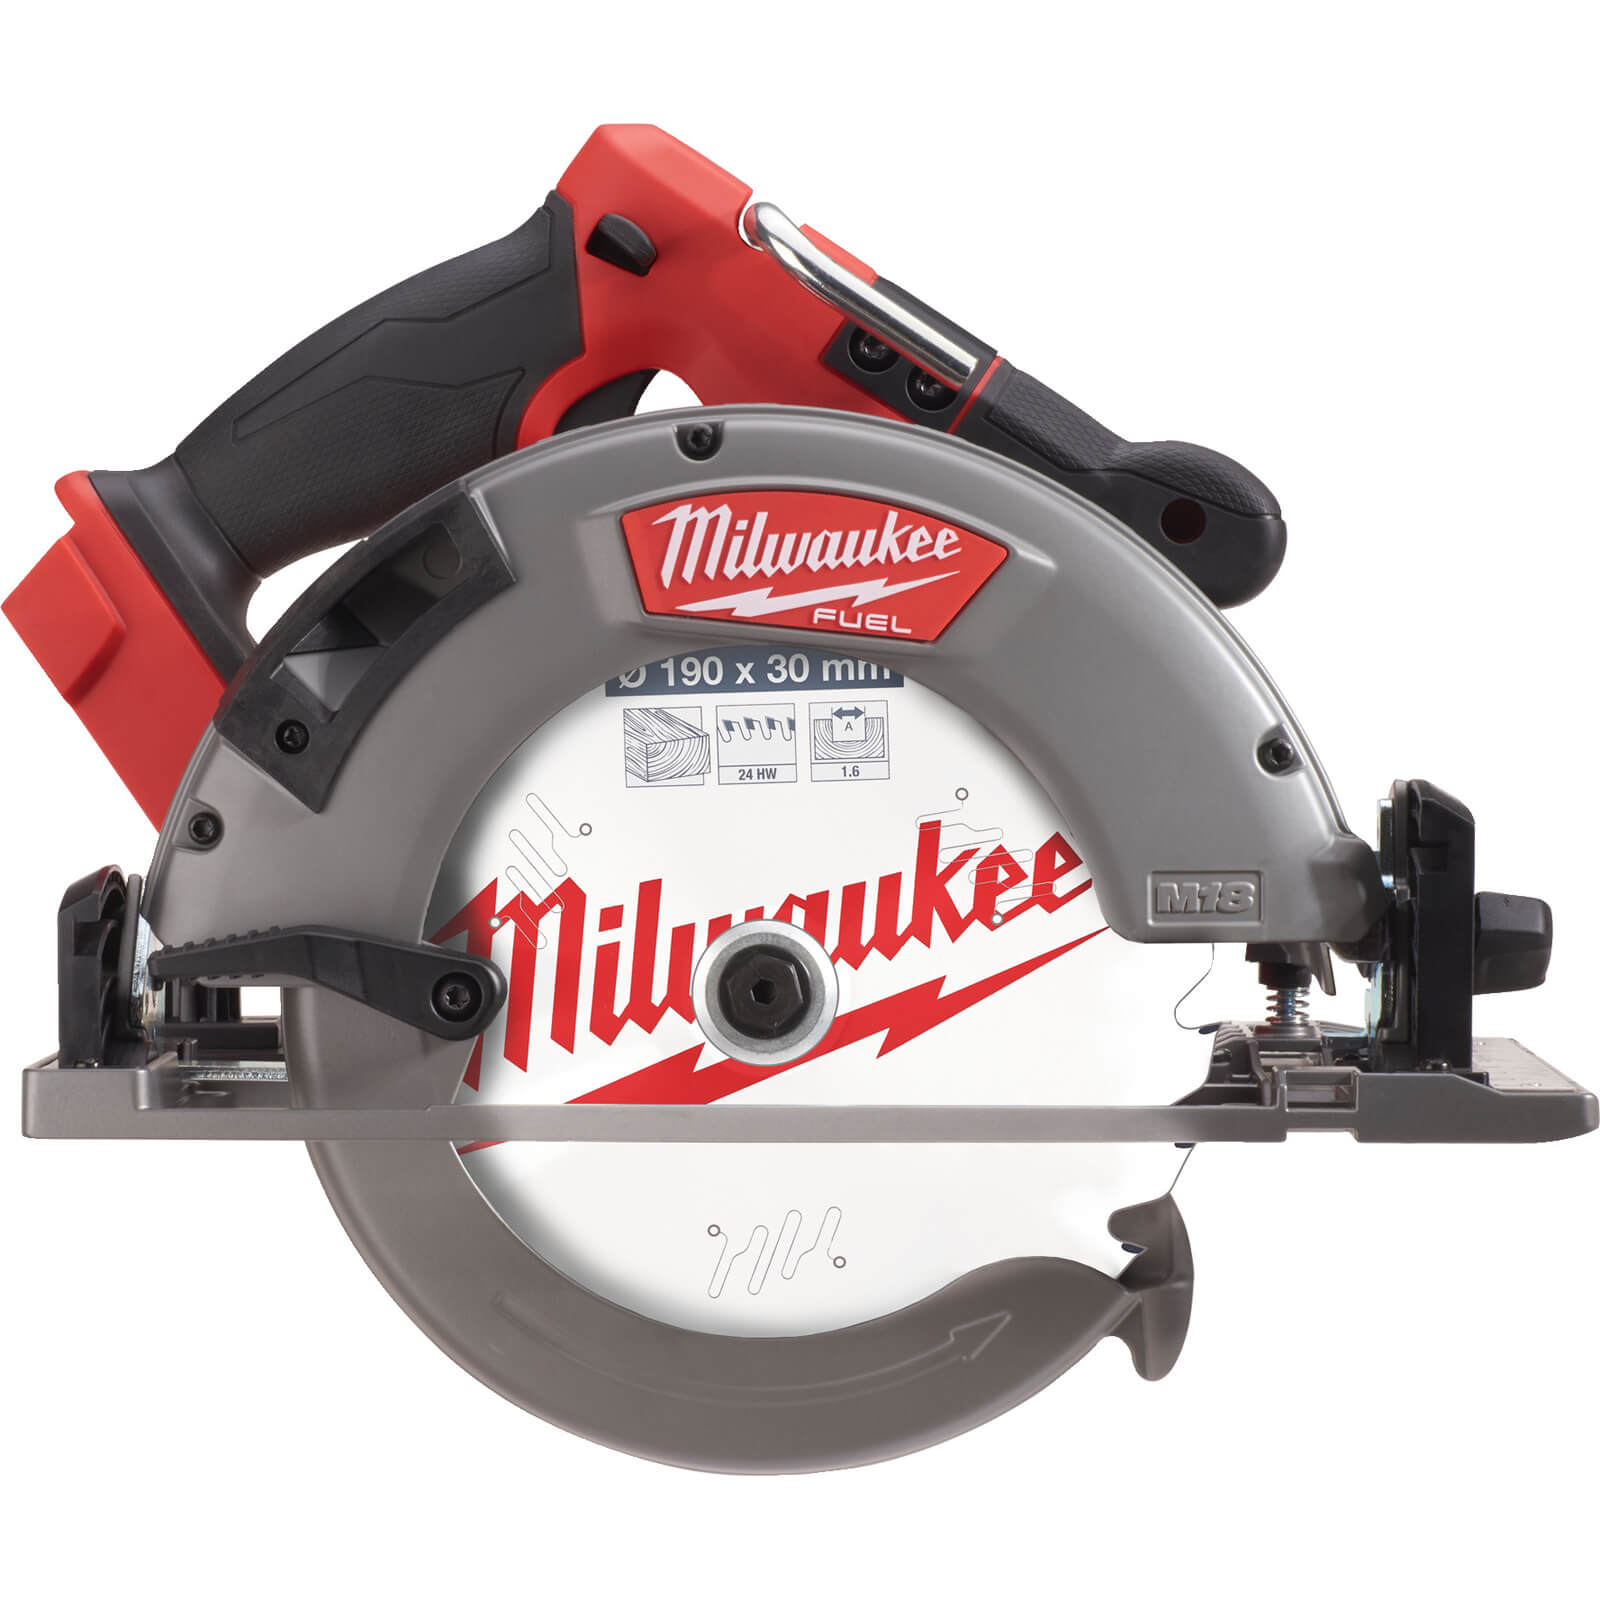 Image of Milwaukee M18 FCSG66 Fuel 18v Cordless Brushless Circular Saw 190mm No Batteries No Charger No Case